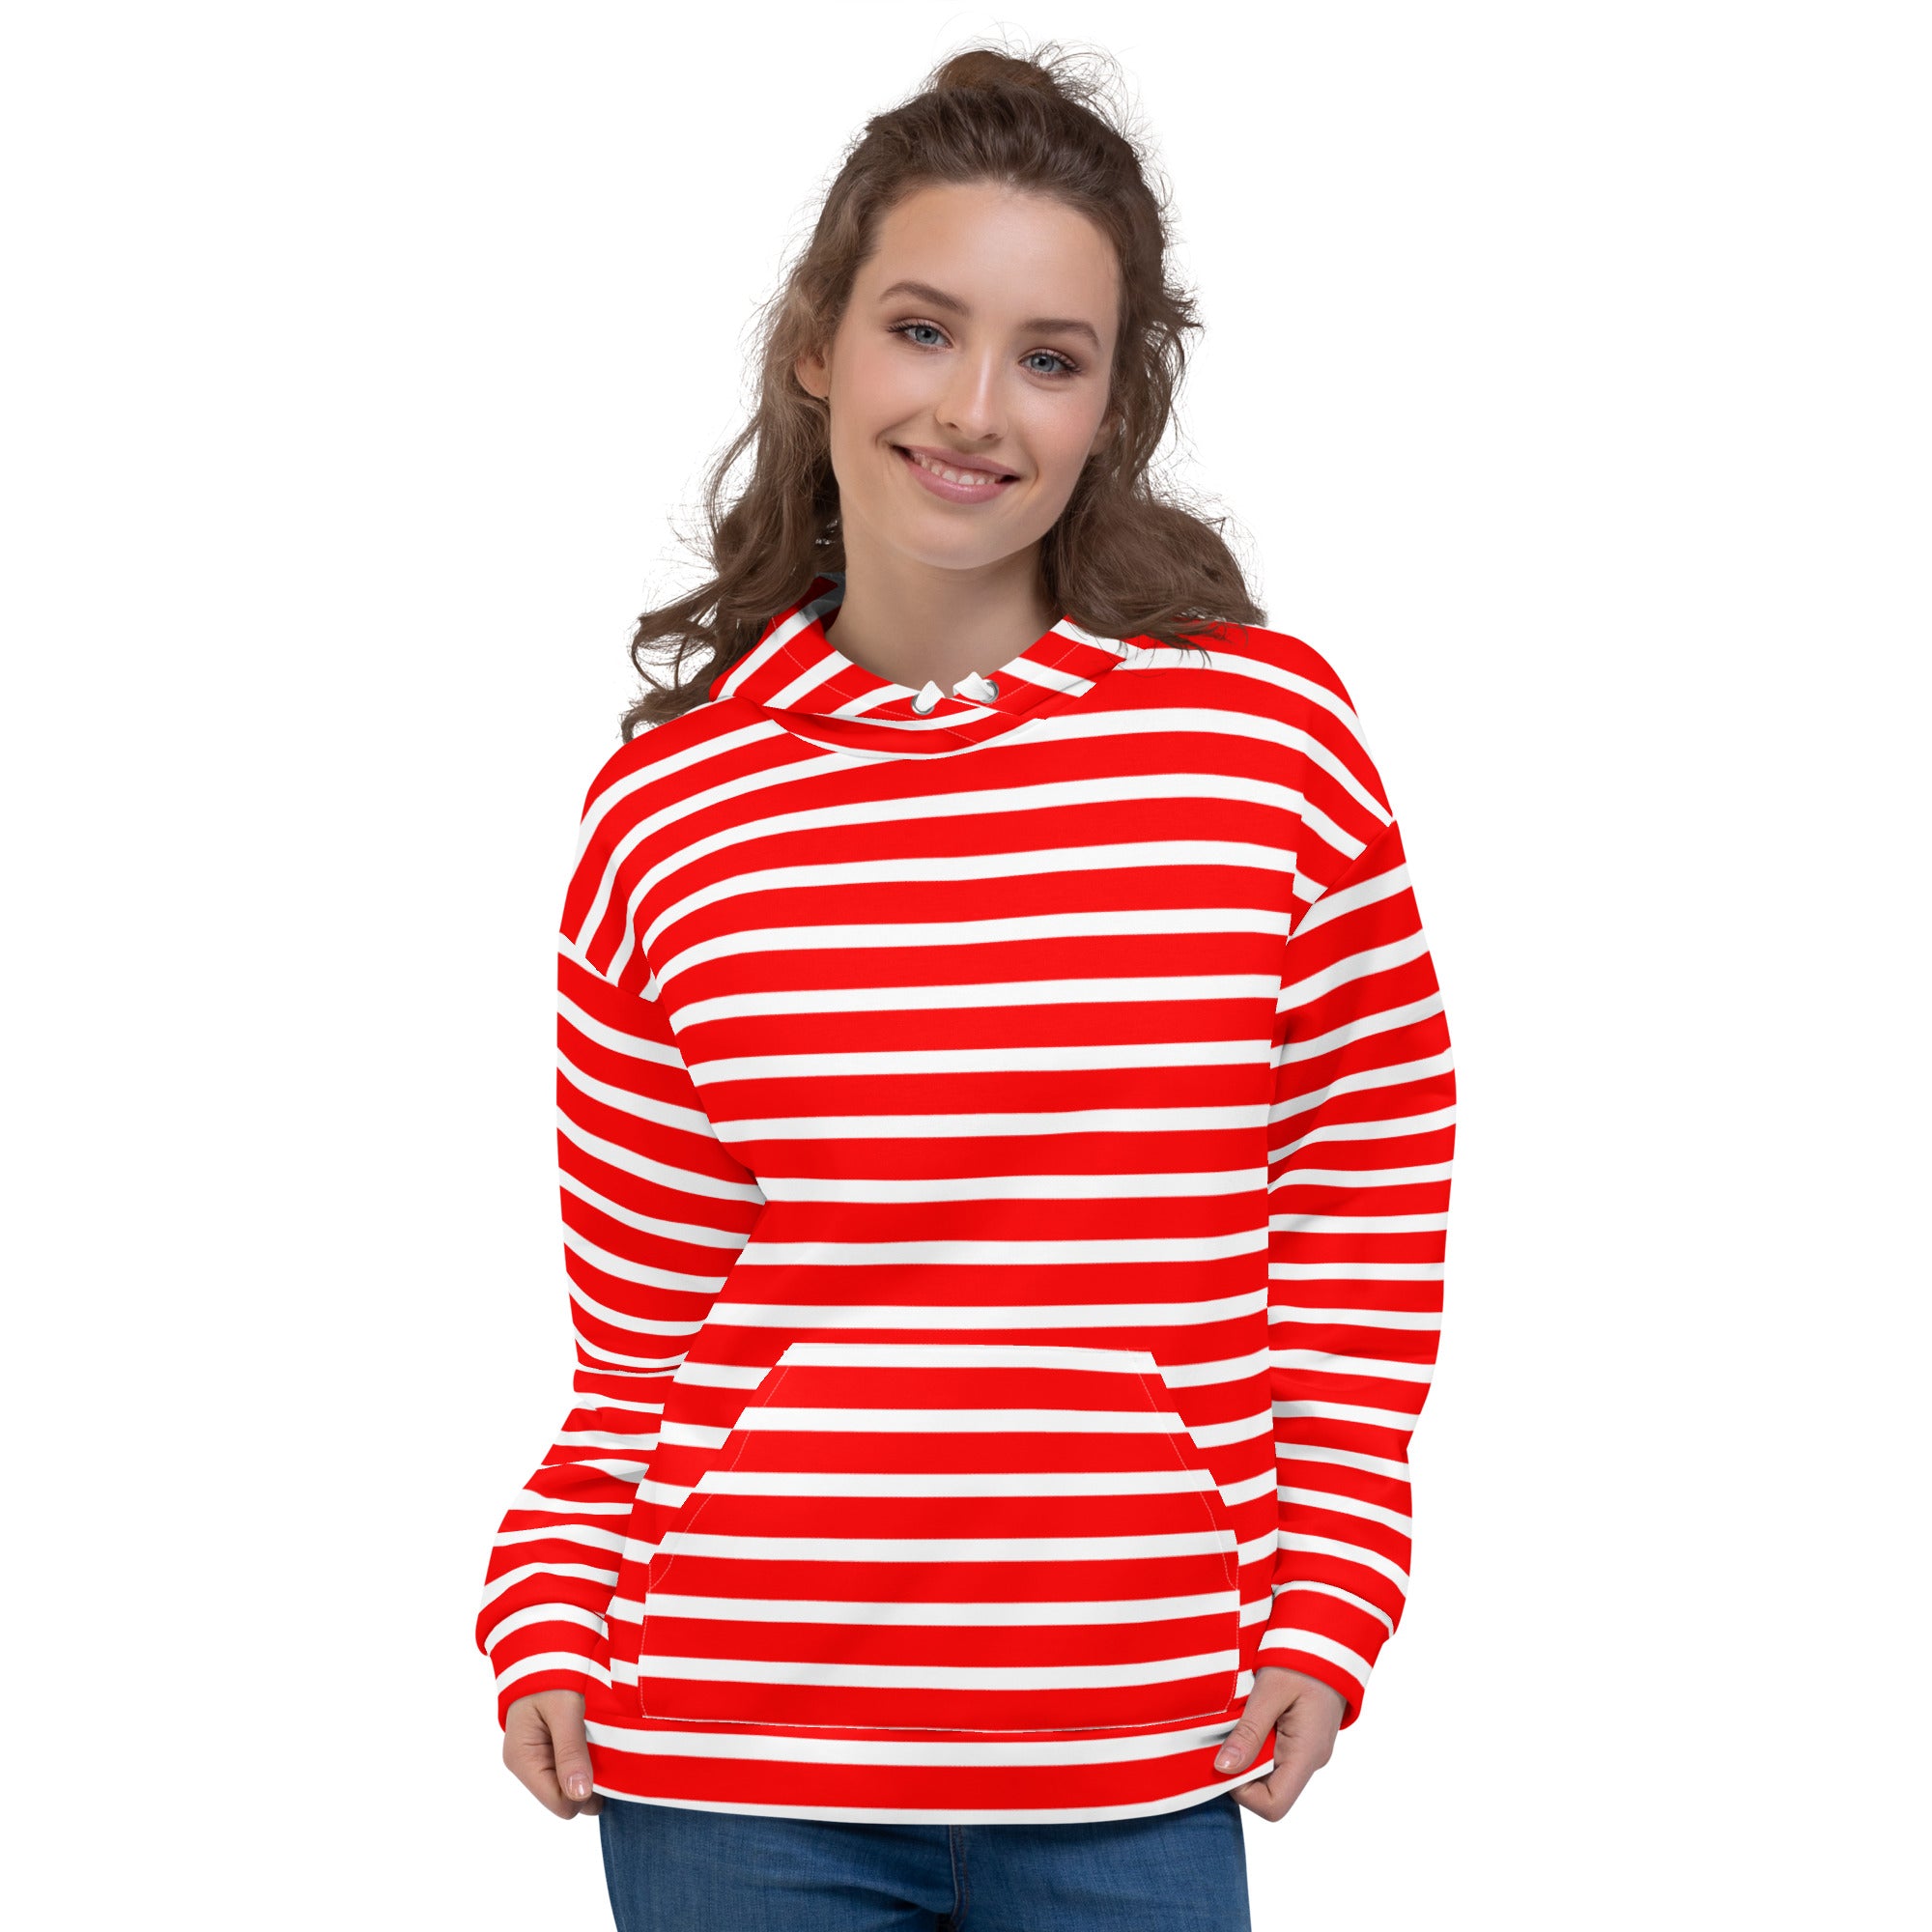 Unisex Hoodie- White and Red Striped